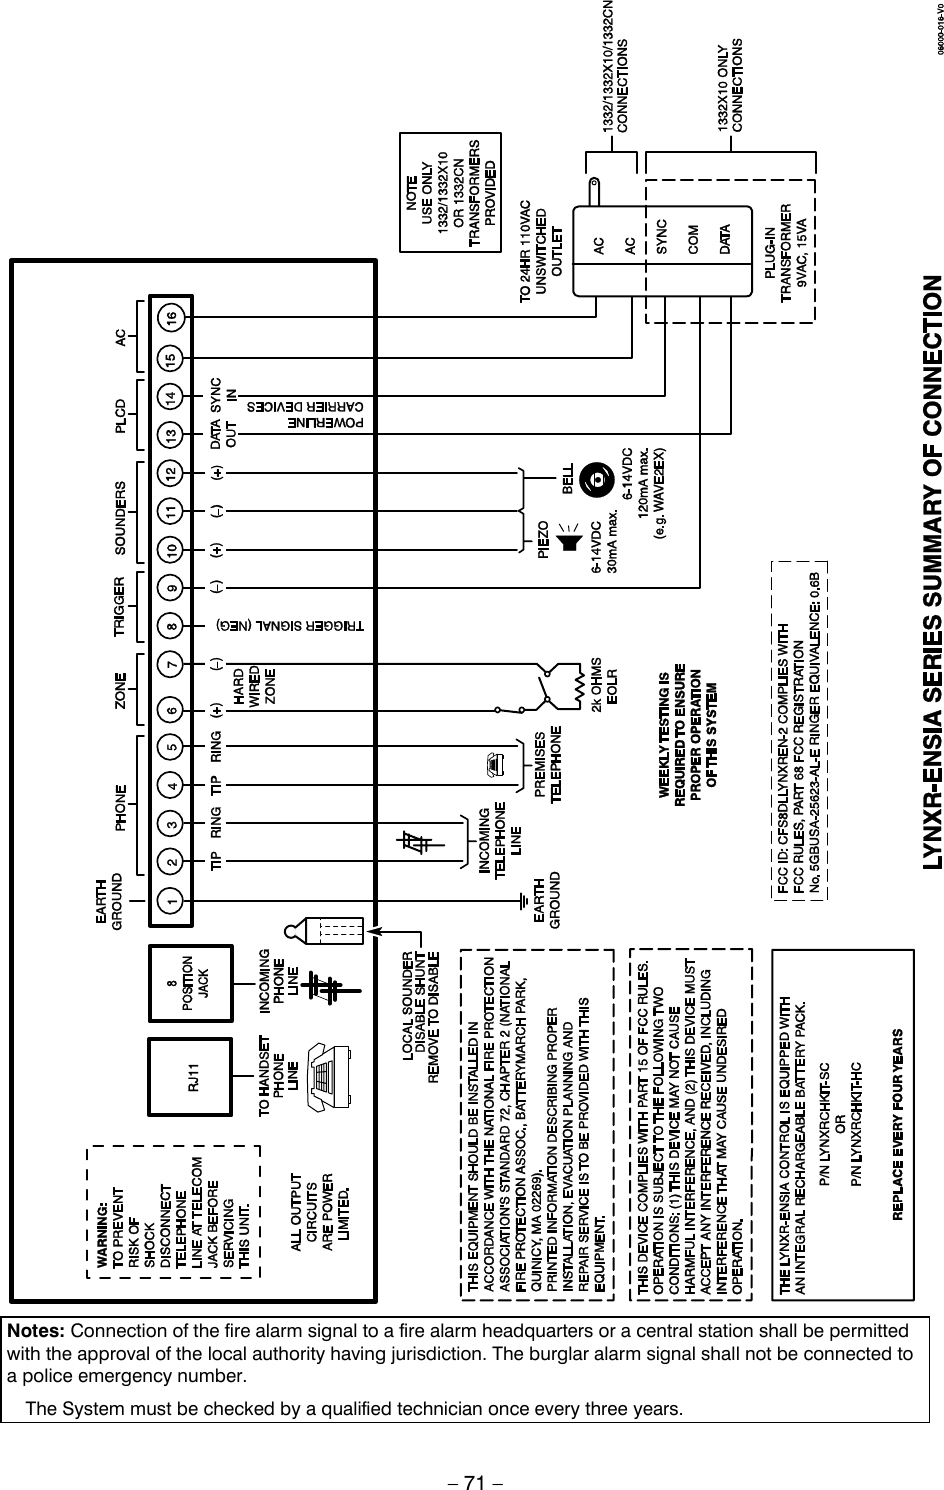  – 71 –  Notes: Connection of the fire alarm signal to a fire alarm headquarters or a central station shall be permitted with the approval of the local authority having jurisdiction. The burglar alarm signal shall not be connected to a police emergency number.    The System must be checked by a qualified technician once every three years.     